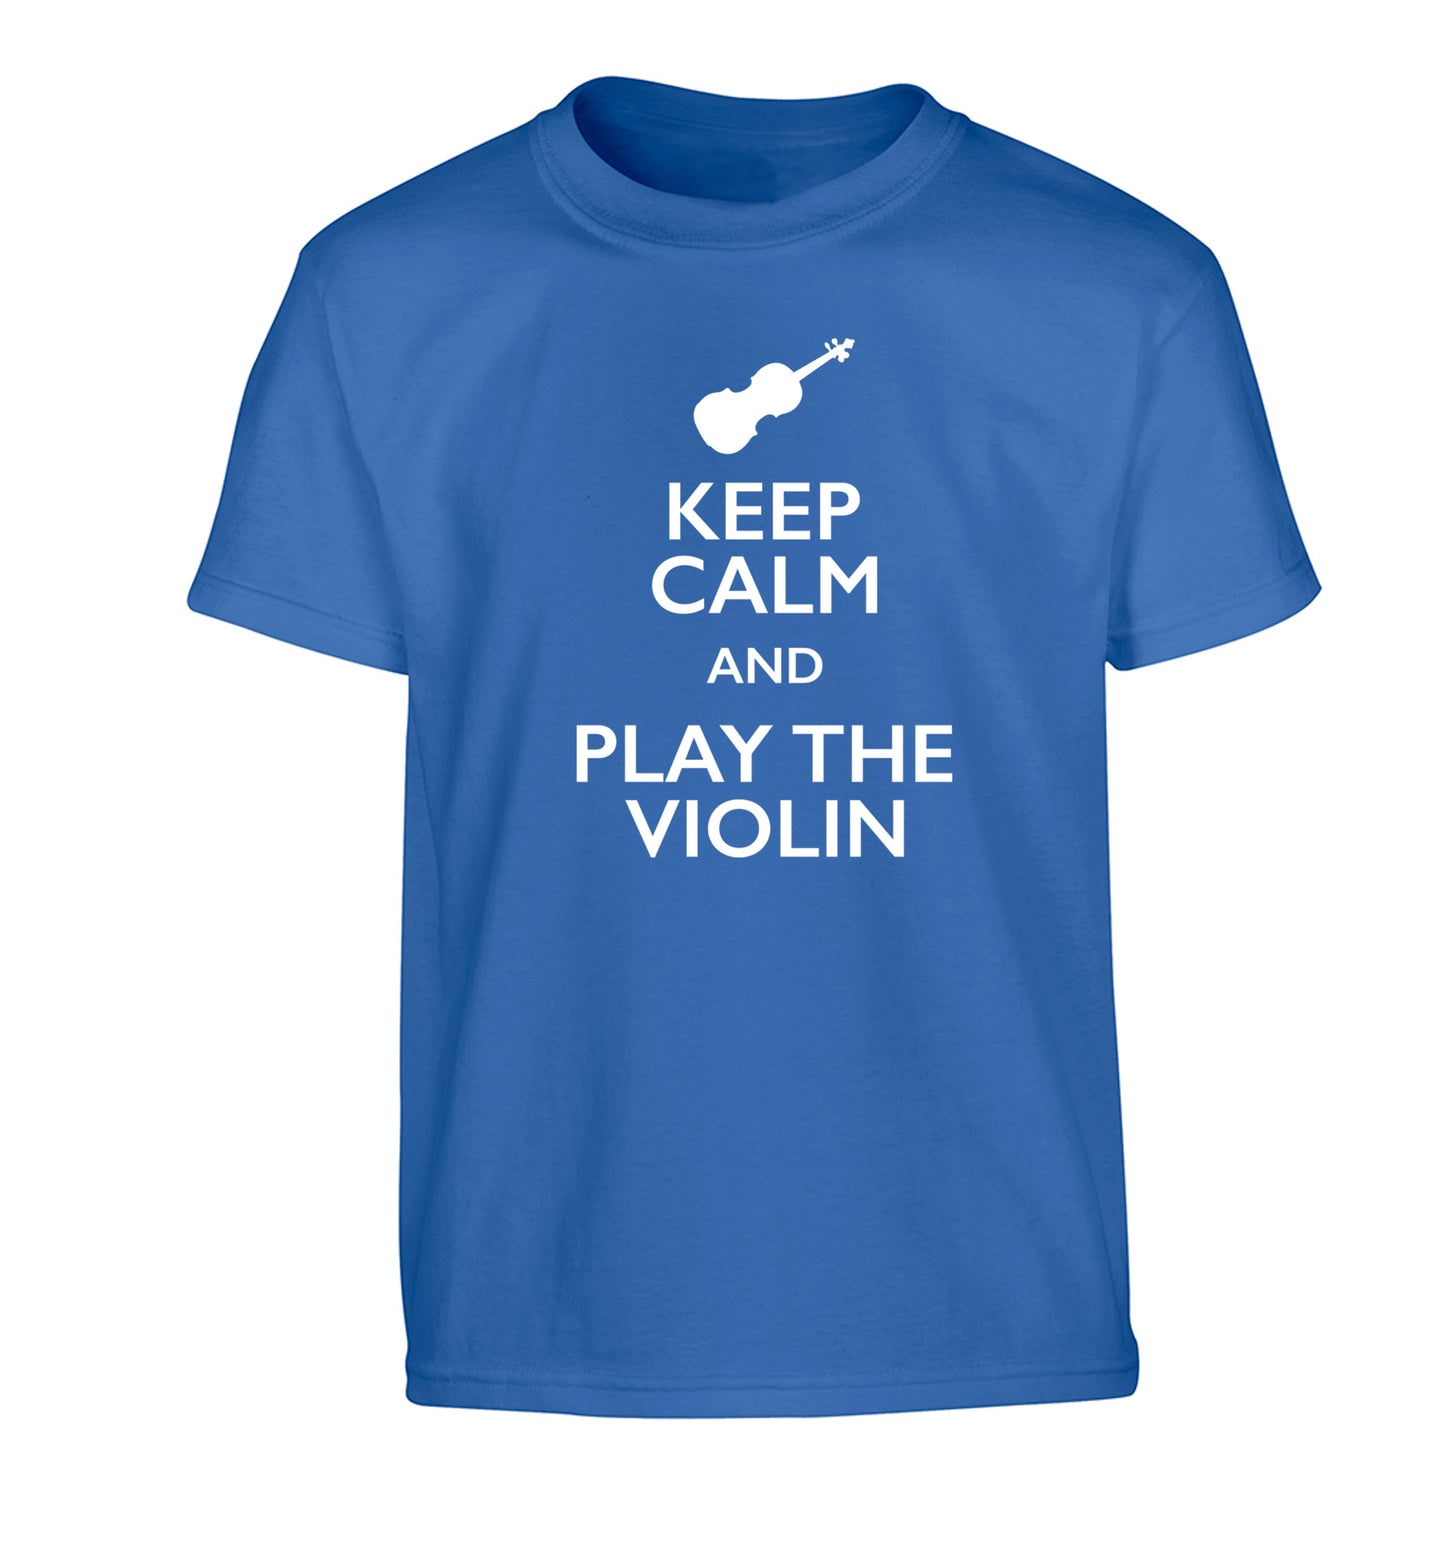 Keep calm and play the violin Children's blue Tshirt 12-13 Years